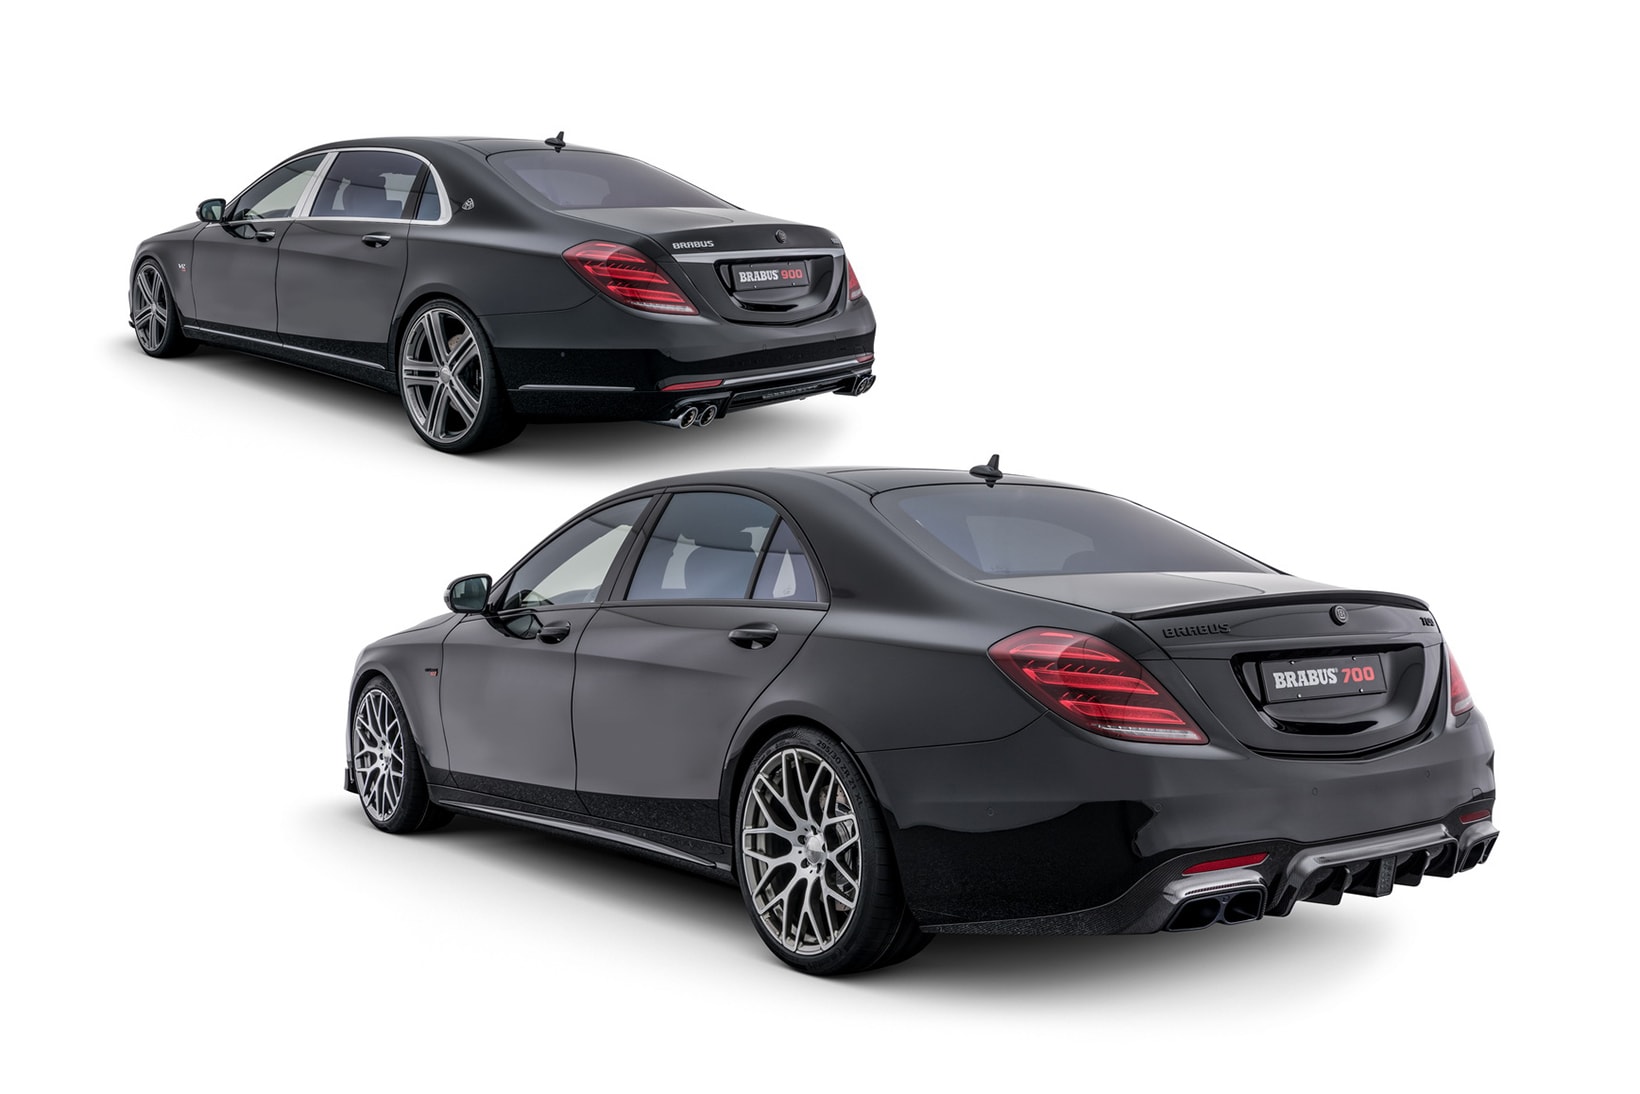 Brabus Mercedes Benz S 63 4MATIC Mercedes Maybach S 650